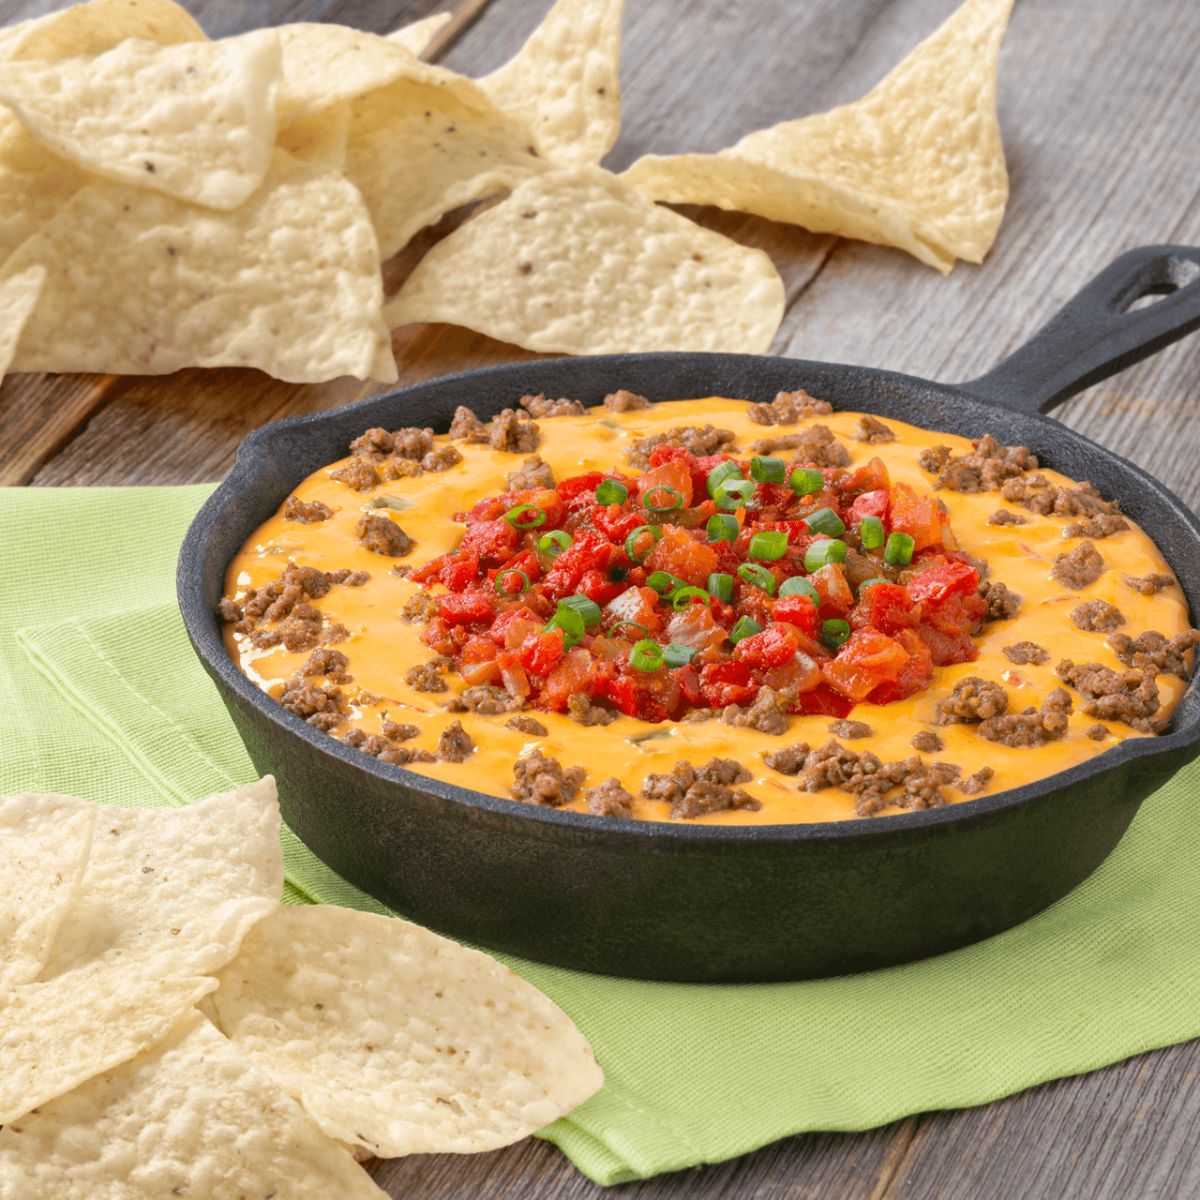 Flavorful queso fundido dip in a black skillet.